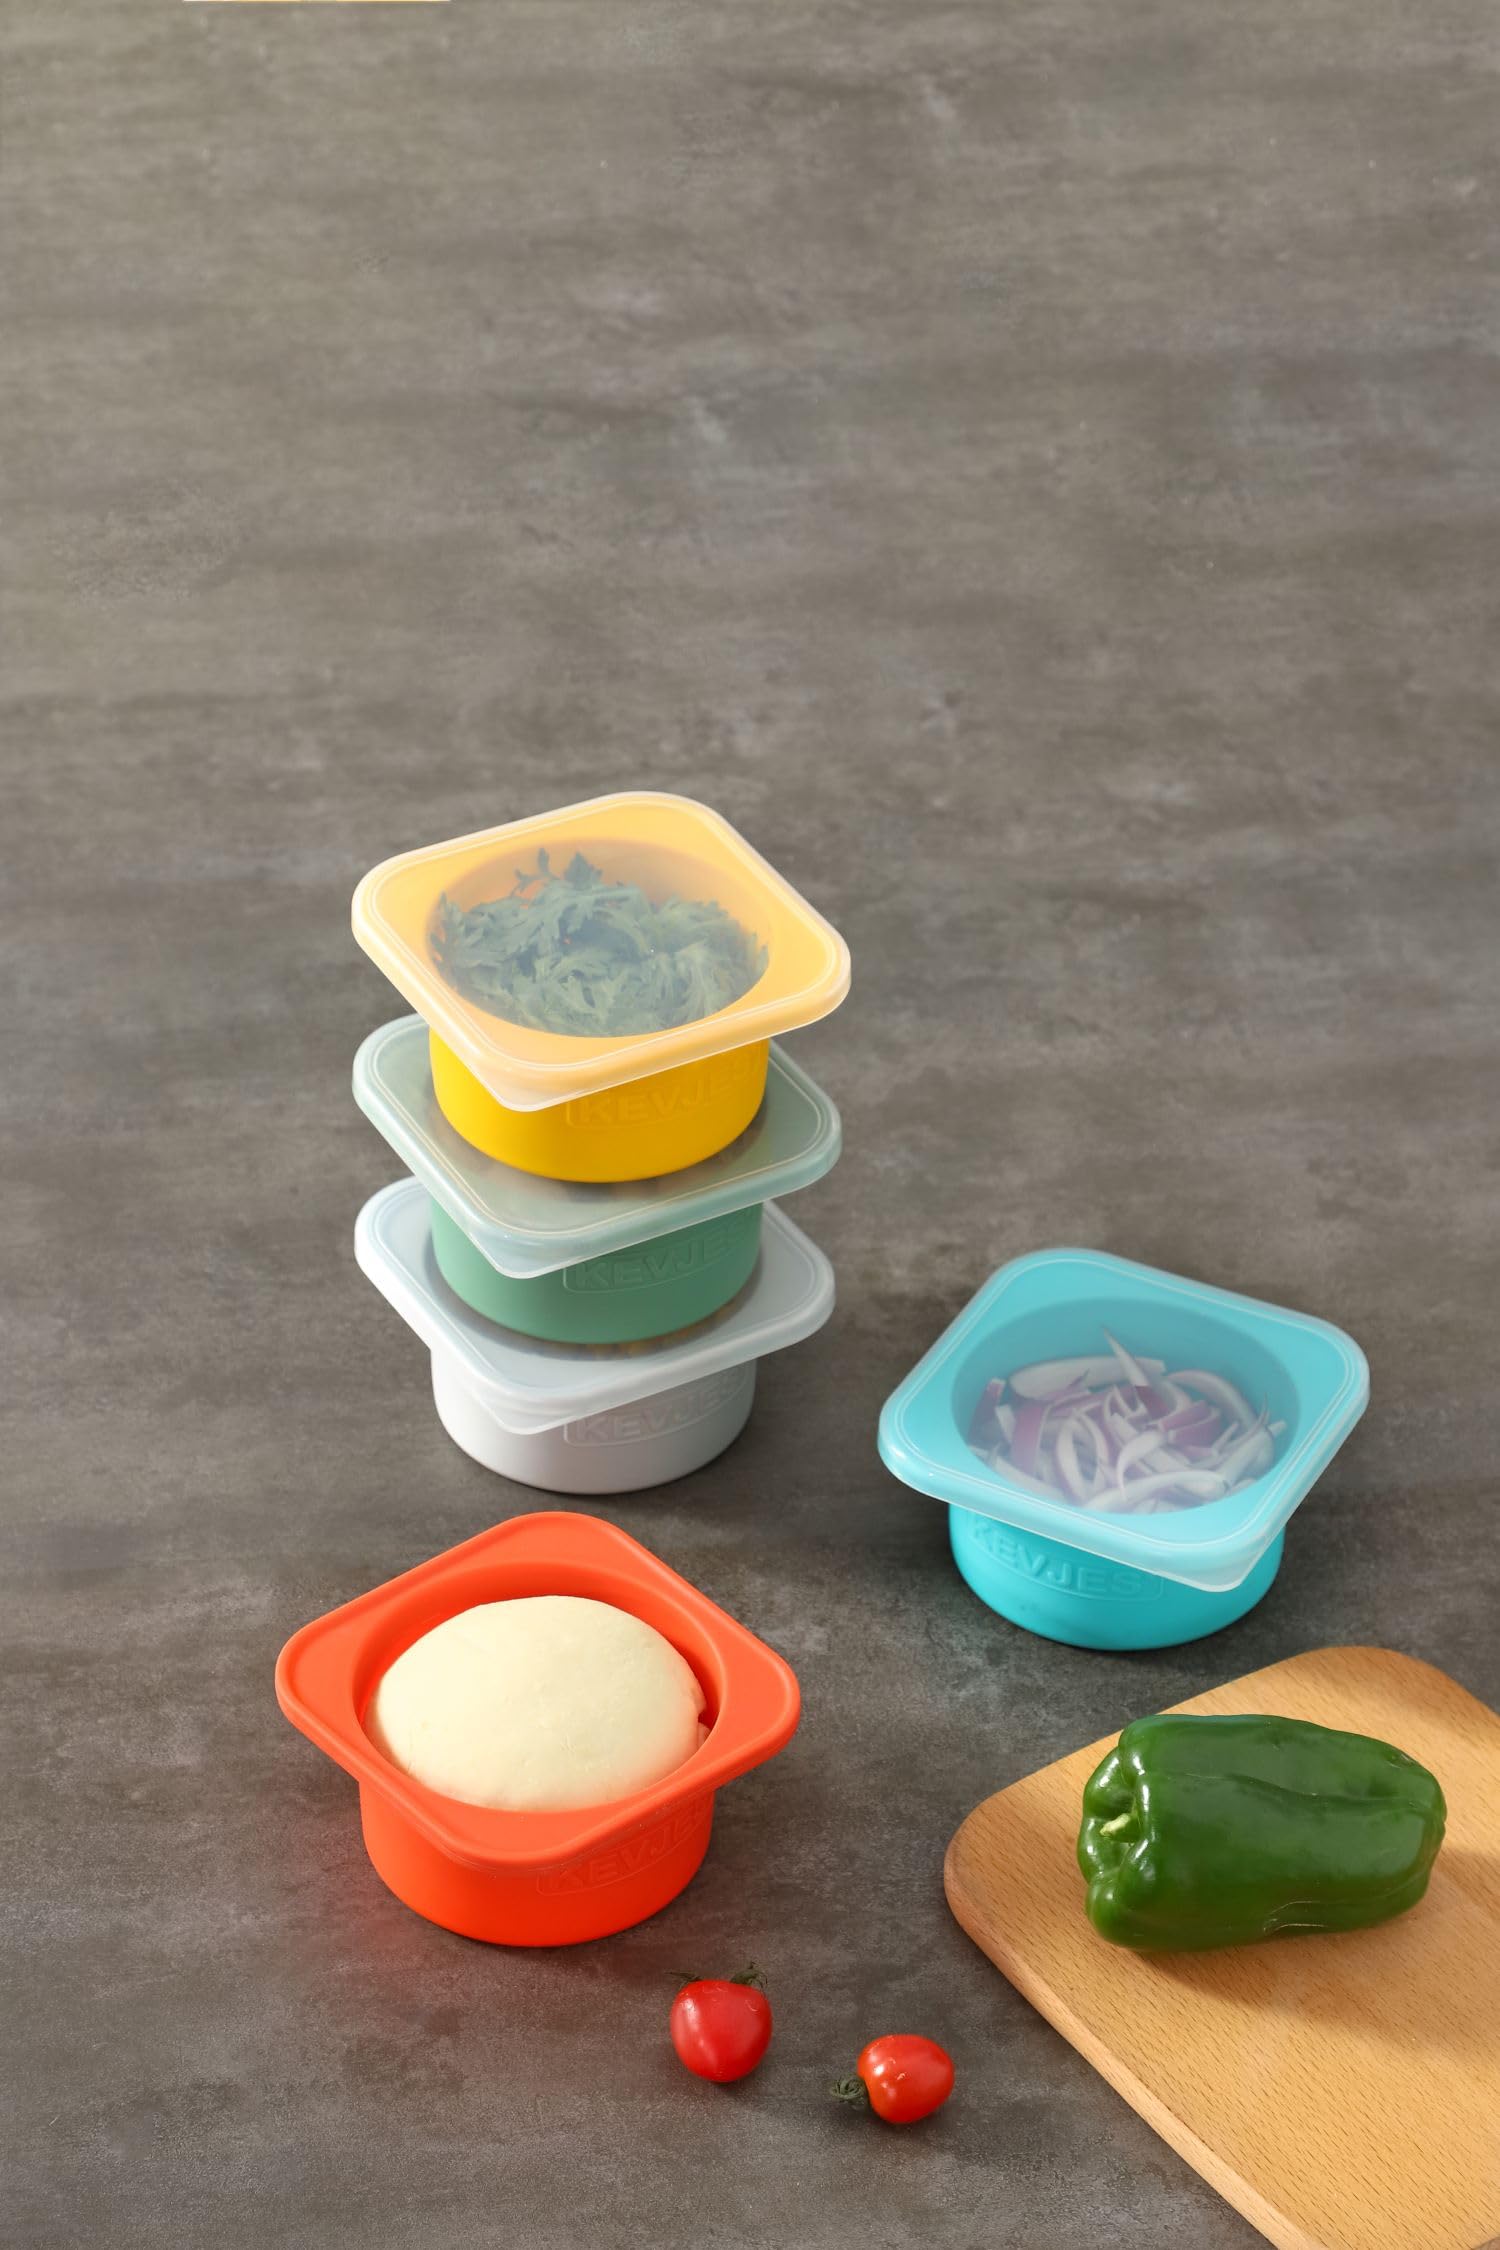 KEVJES Stackable Silicone Pizza Dough Tray with Lids-500ml portion-6pack (2 Green+2 Blue+2 Grey)